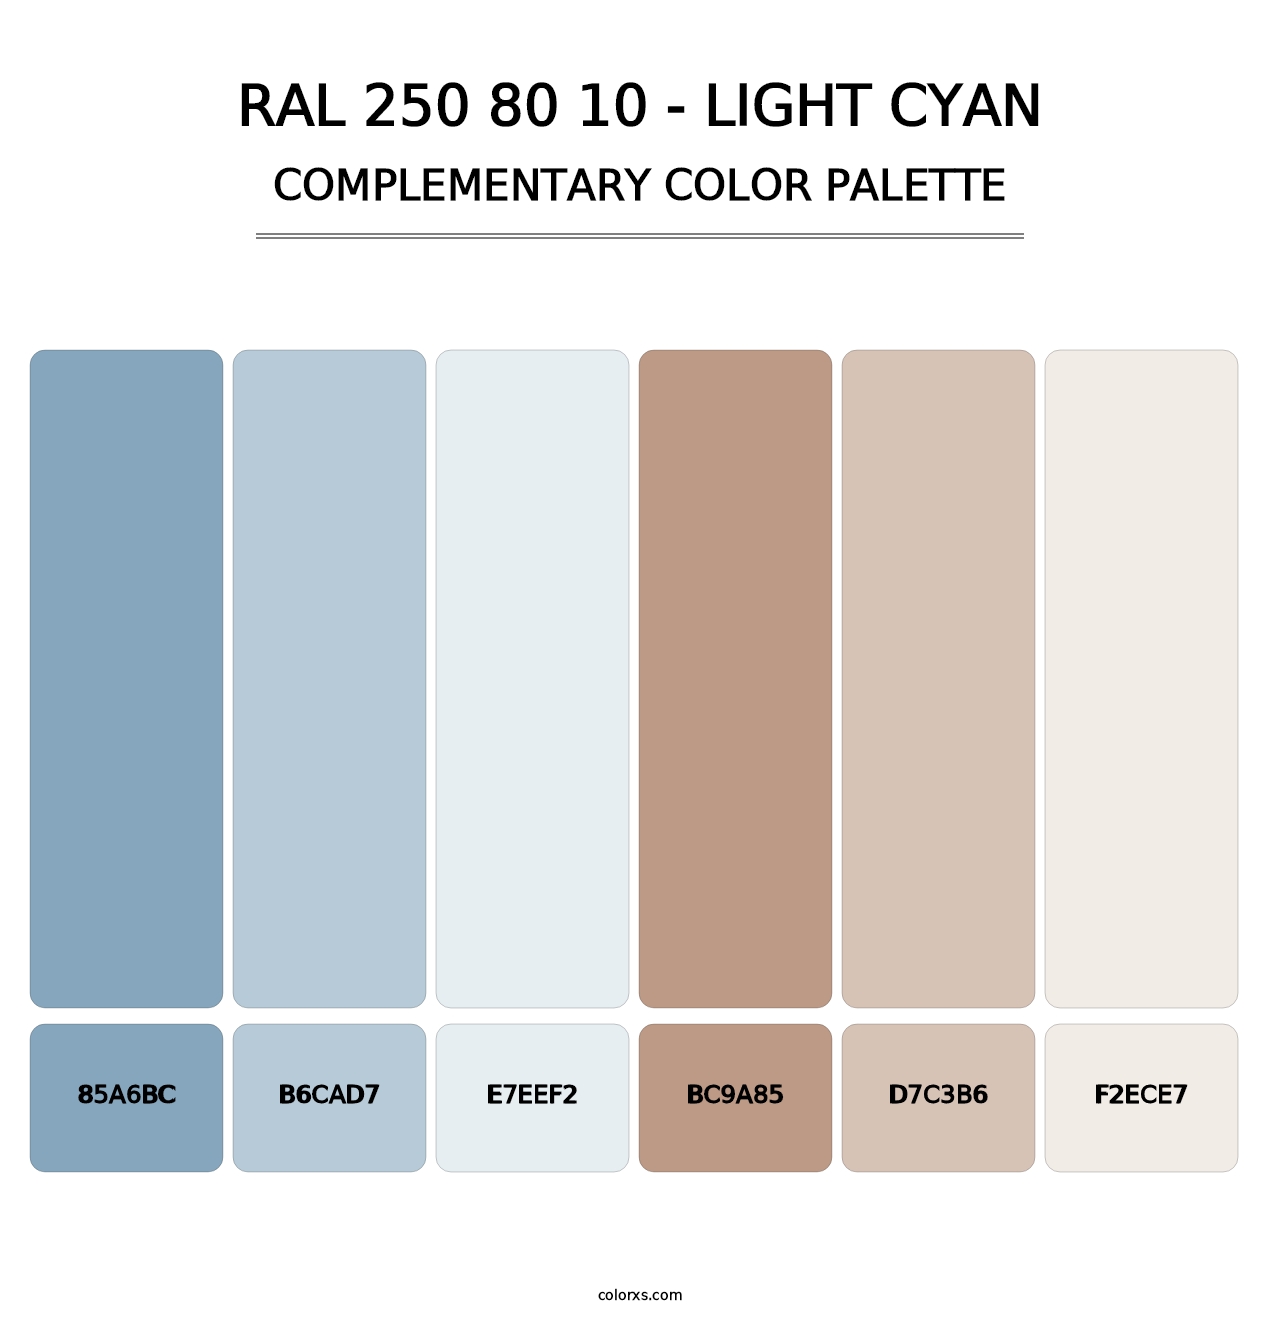 RAL 250 80 10 - Light Cyan - Complementary Color Palette